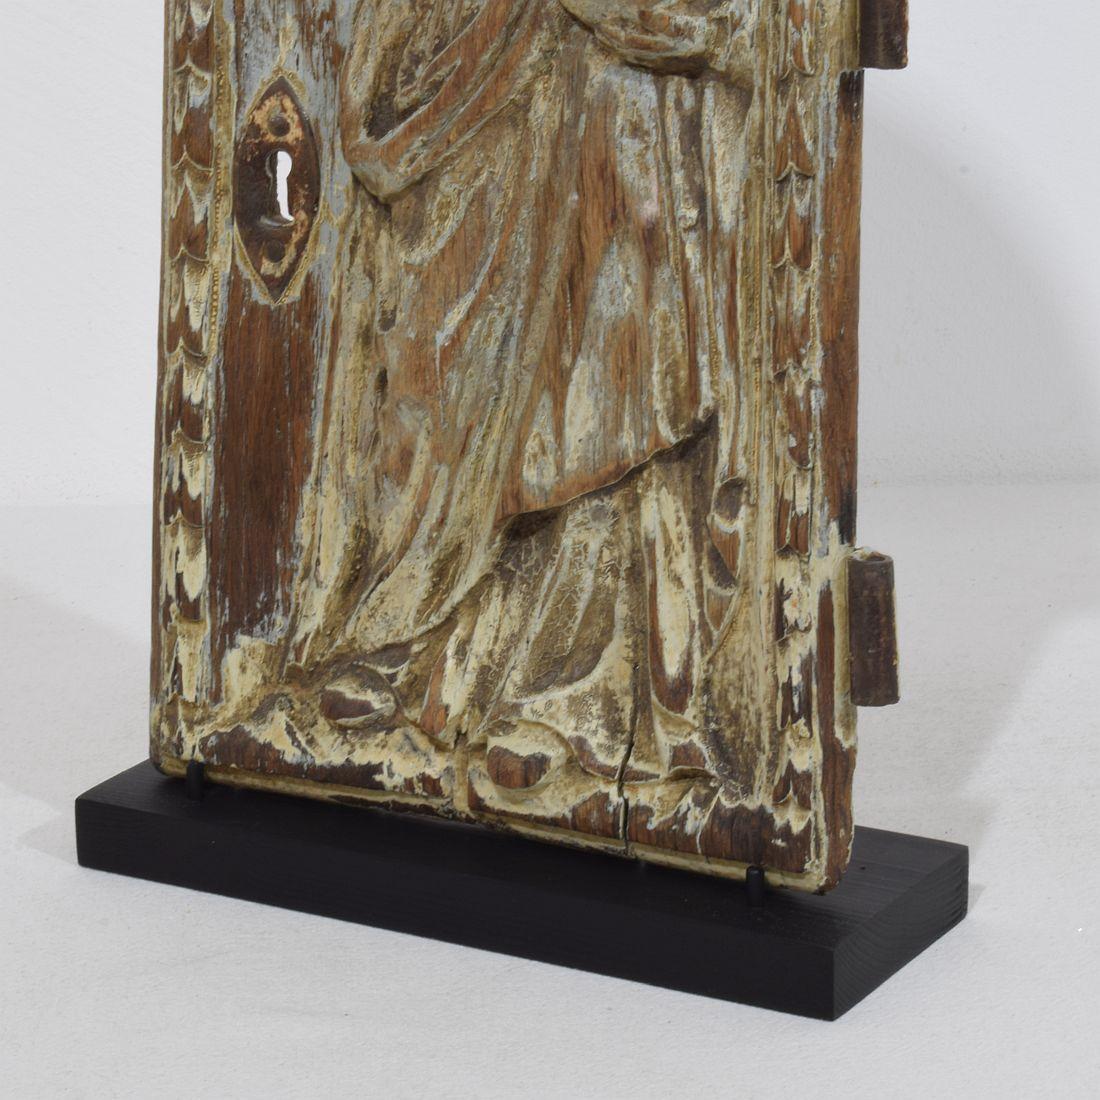 French 18th Century Wooden Tabernacle Door Depicting Christ / Salvator Mundi For Sale 4